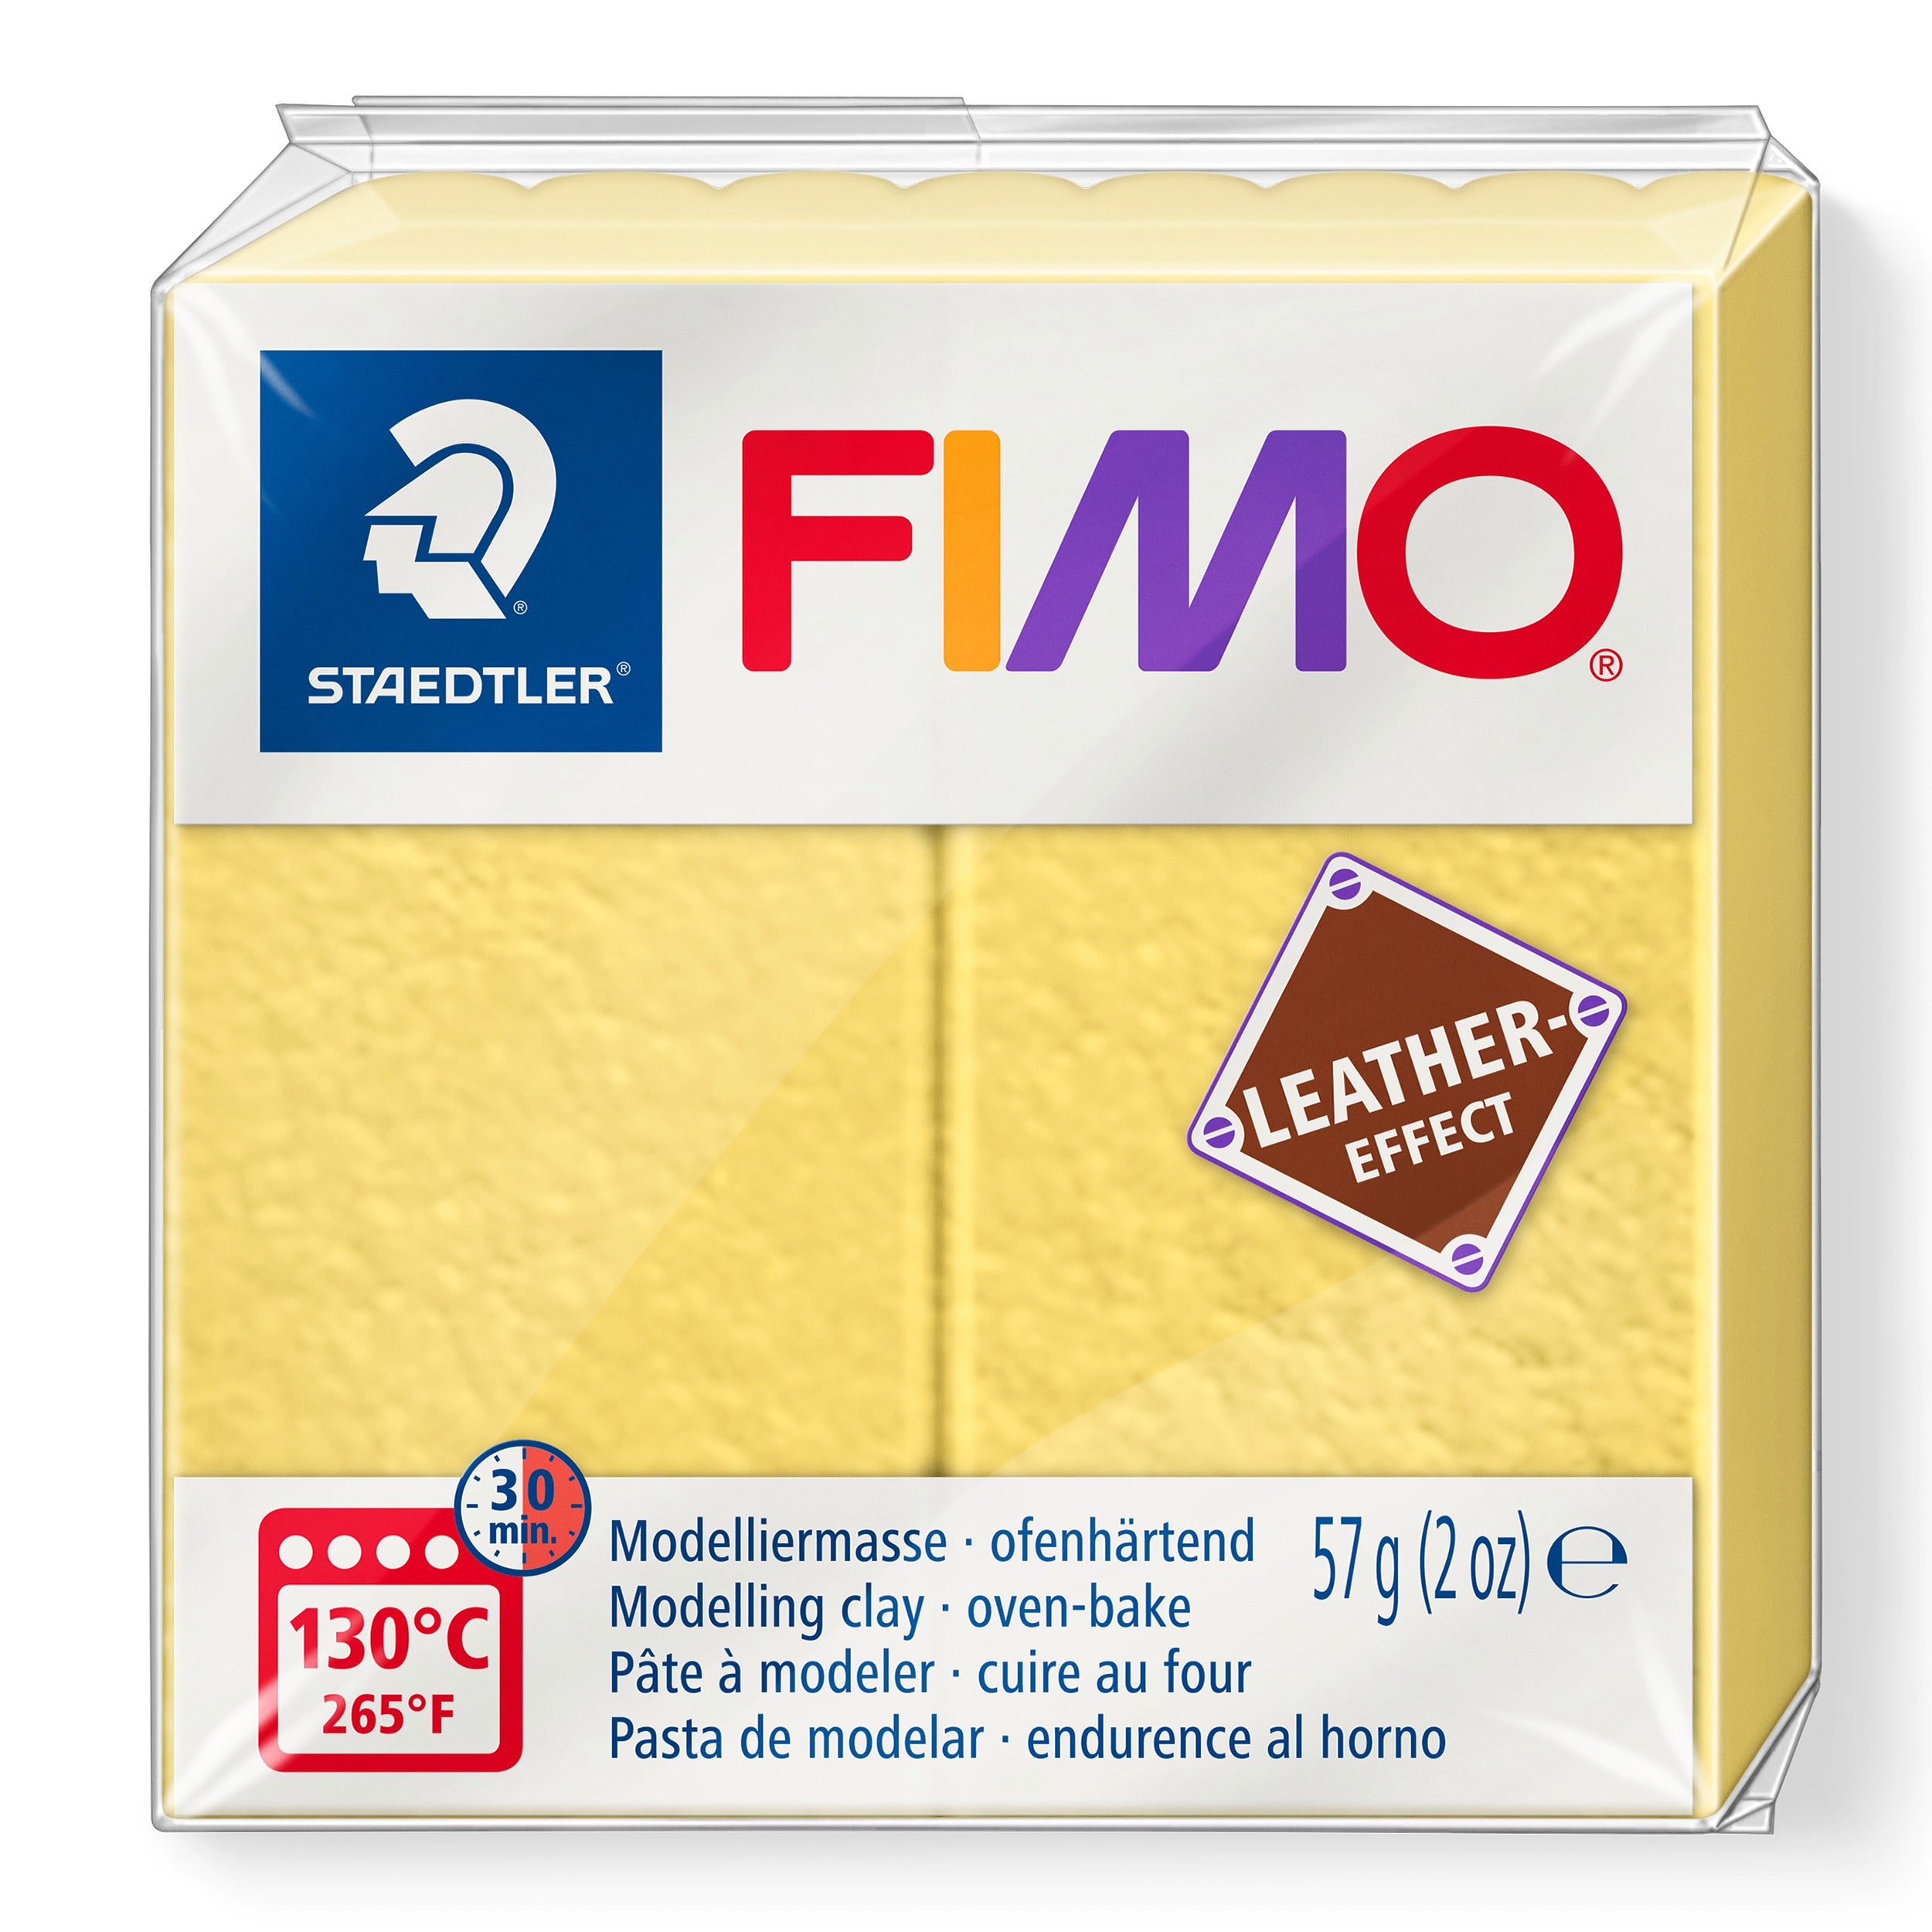 Fimo Leather Effect Polymer Clay Standard Block 57g (2oz) - Safron Yellow